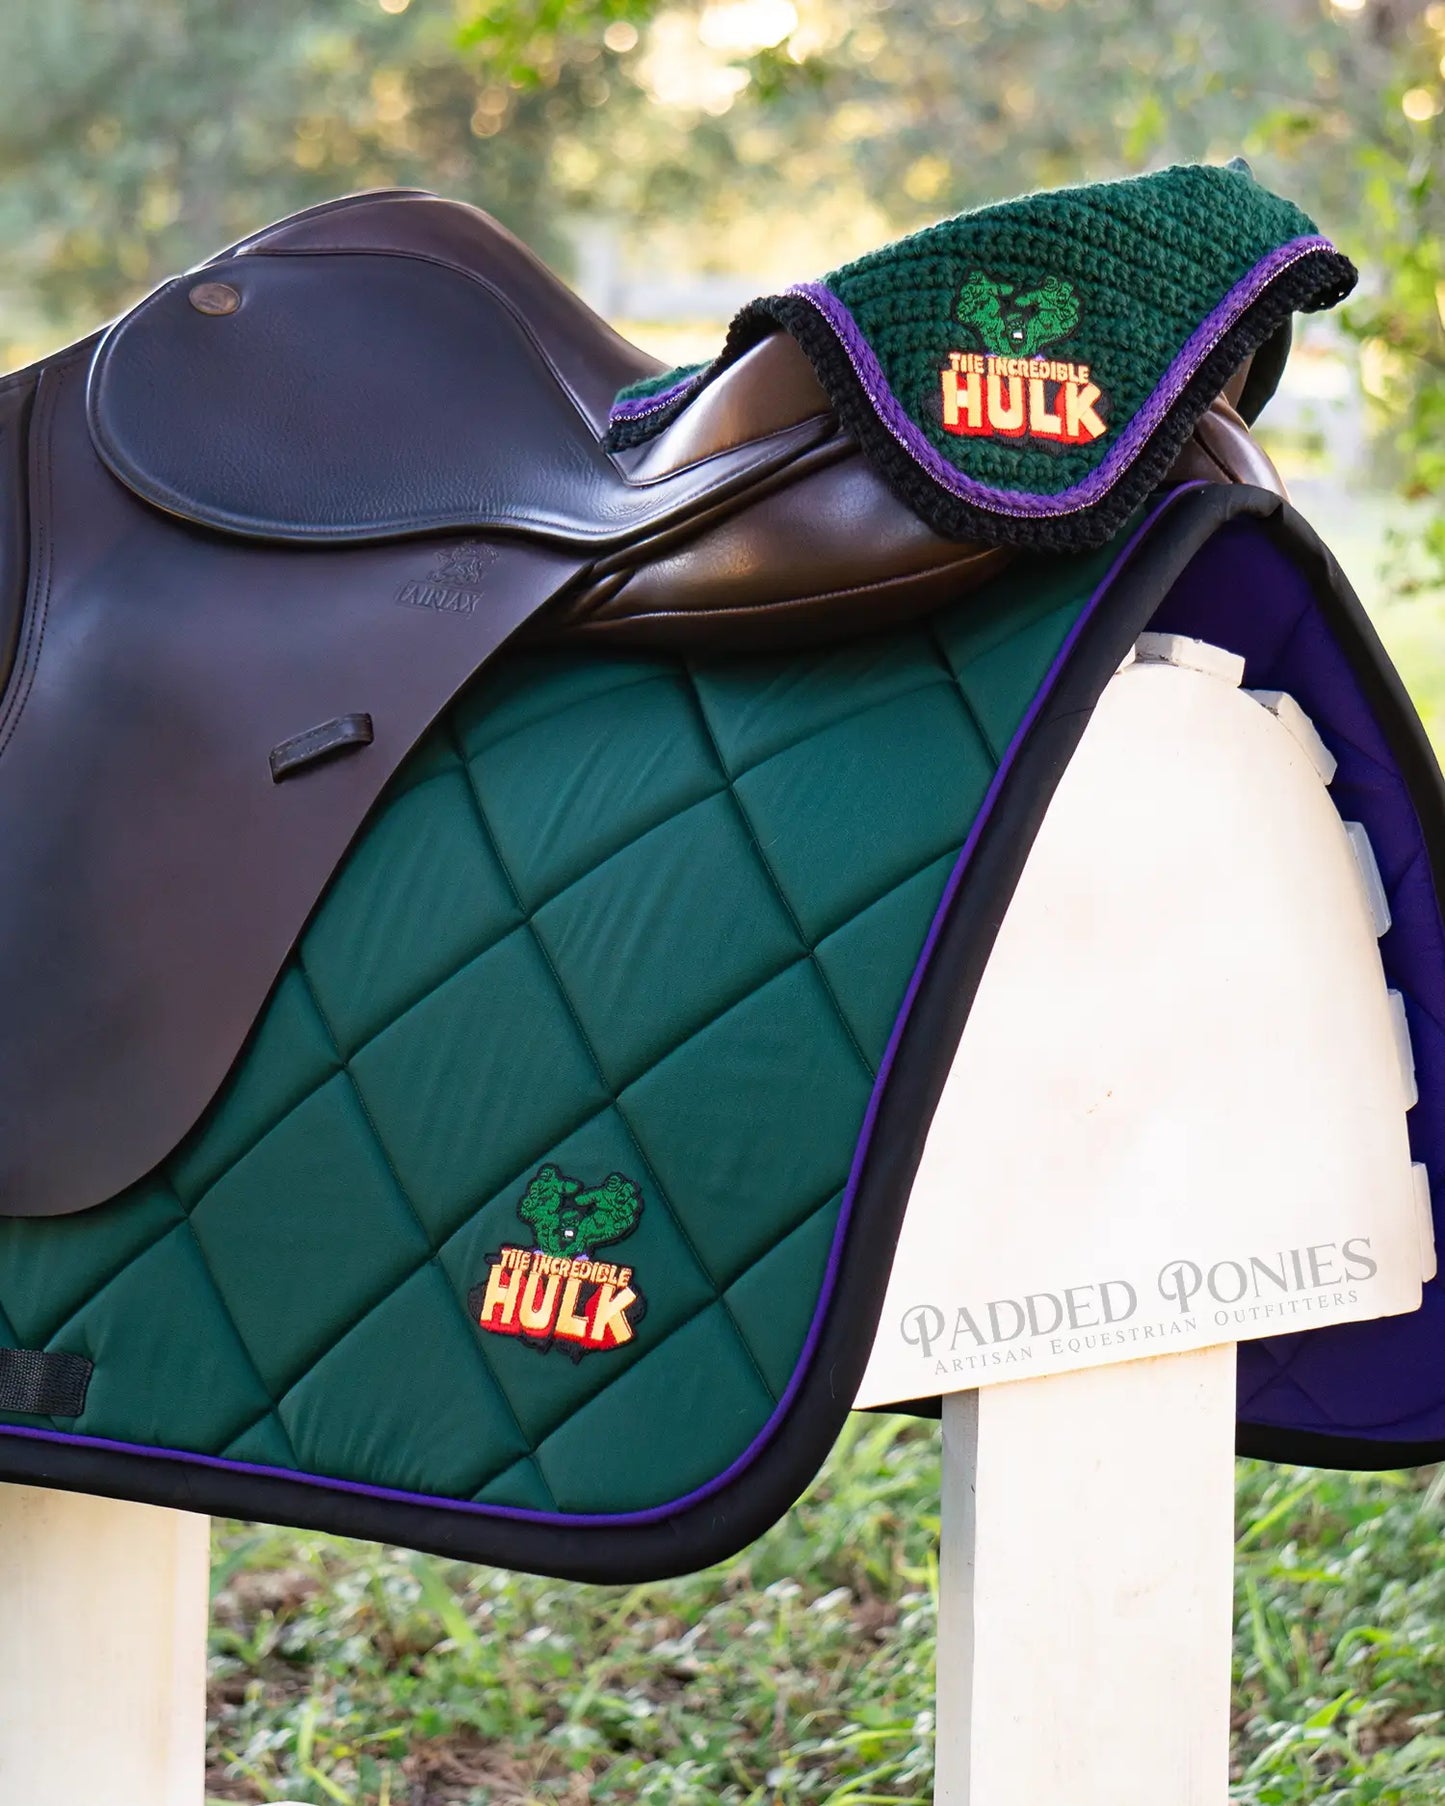 Hunter Green, Black, and Purple Incredible Hulk Marvel Patch All Purpose Saddle Pad with Matching Fly Veil Bonnet